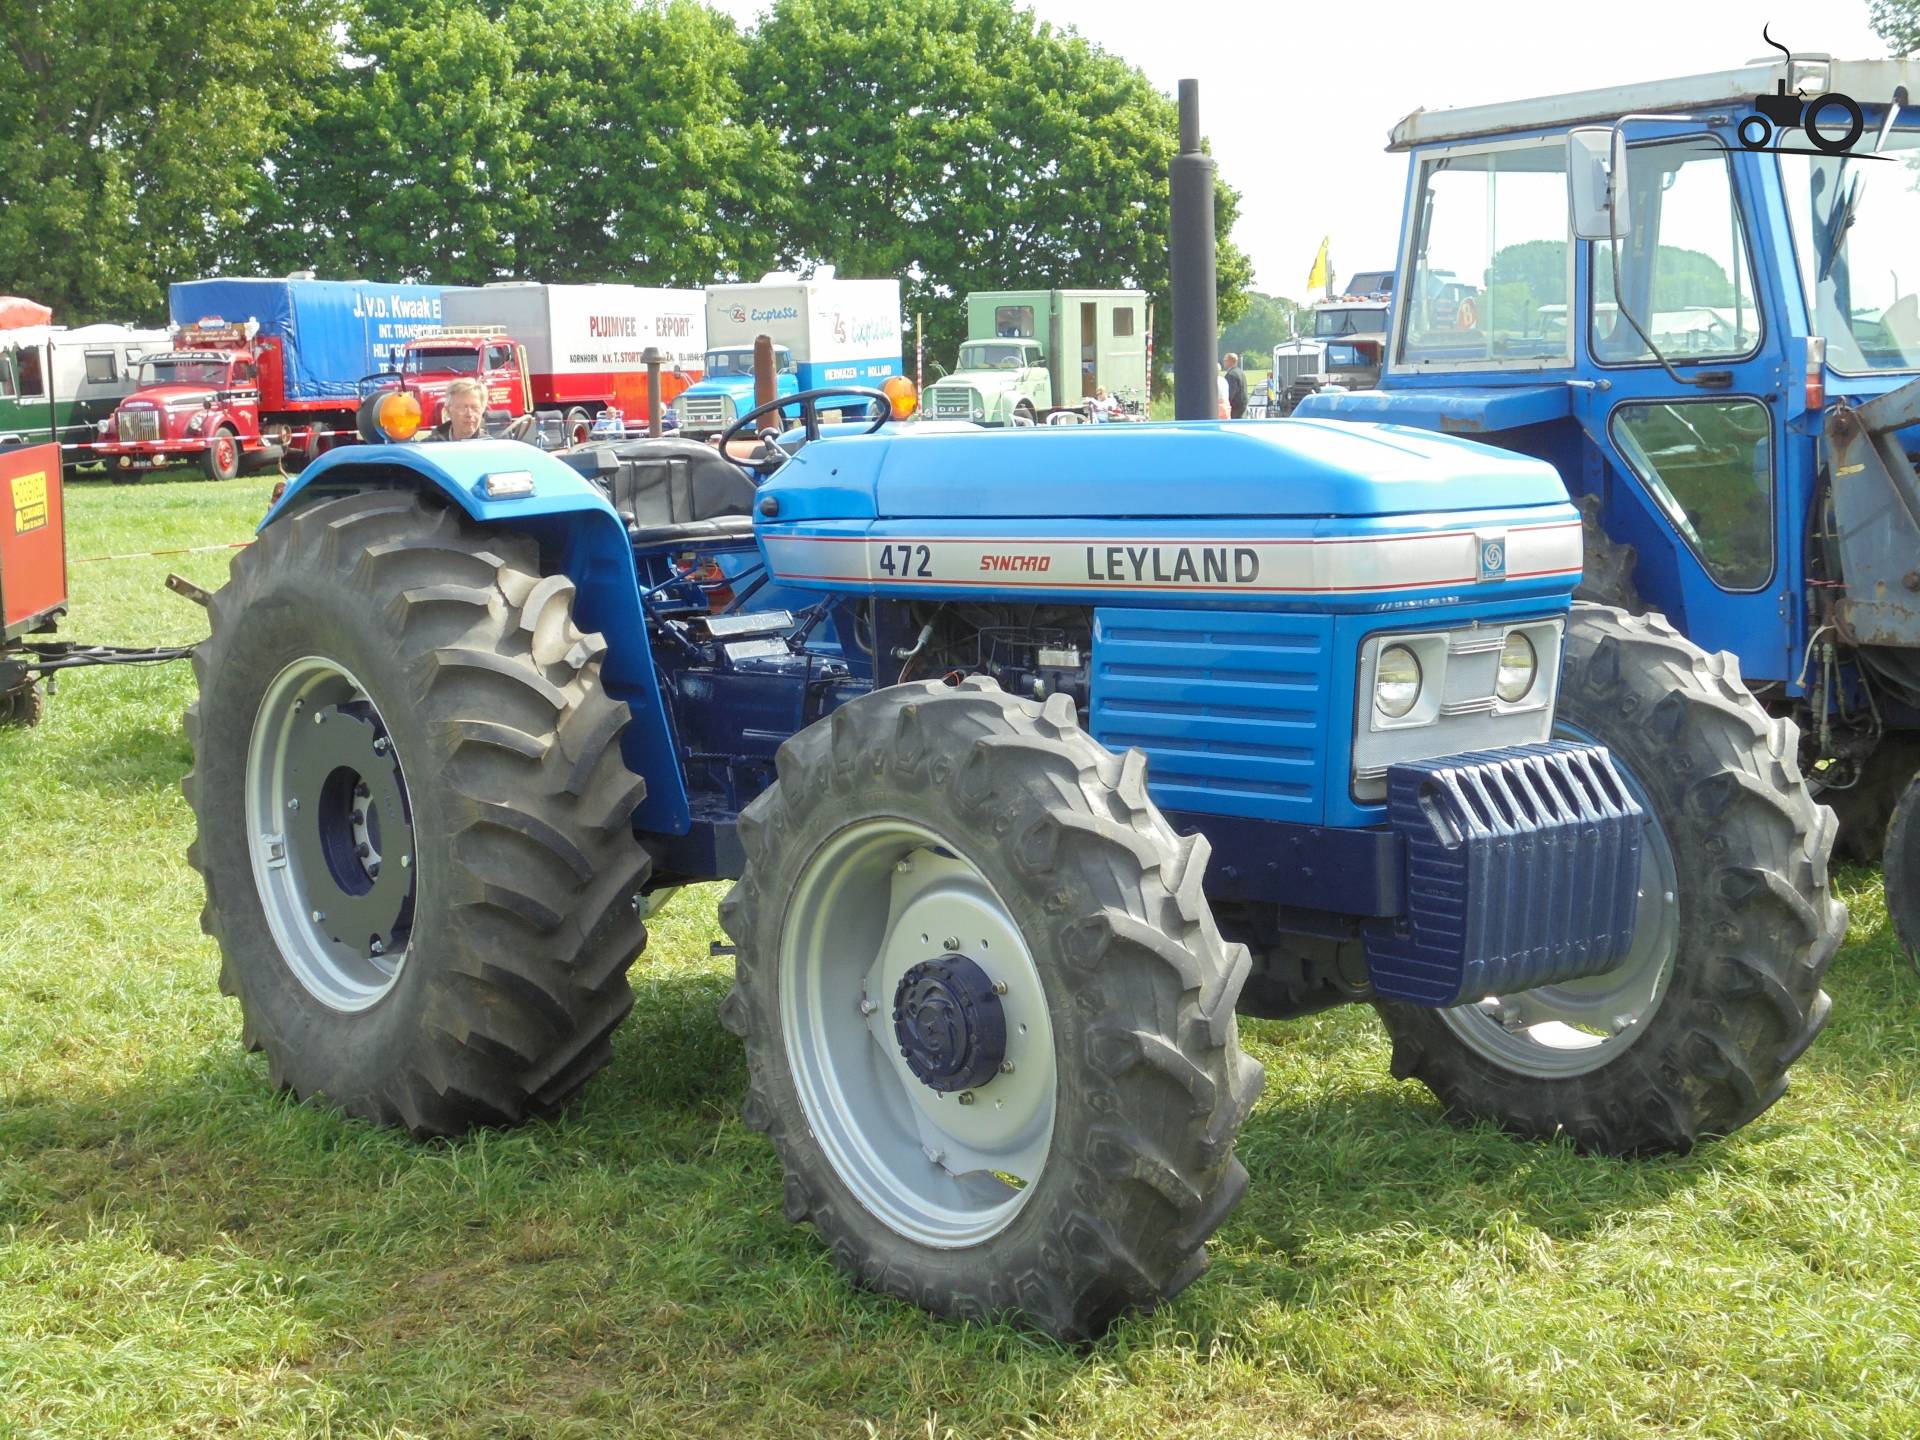 Leyland 472 - United Kingdom - Tractor picture #1165403
